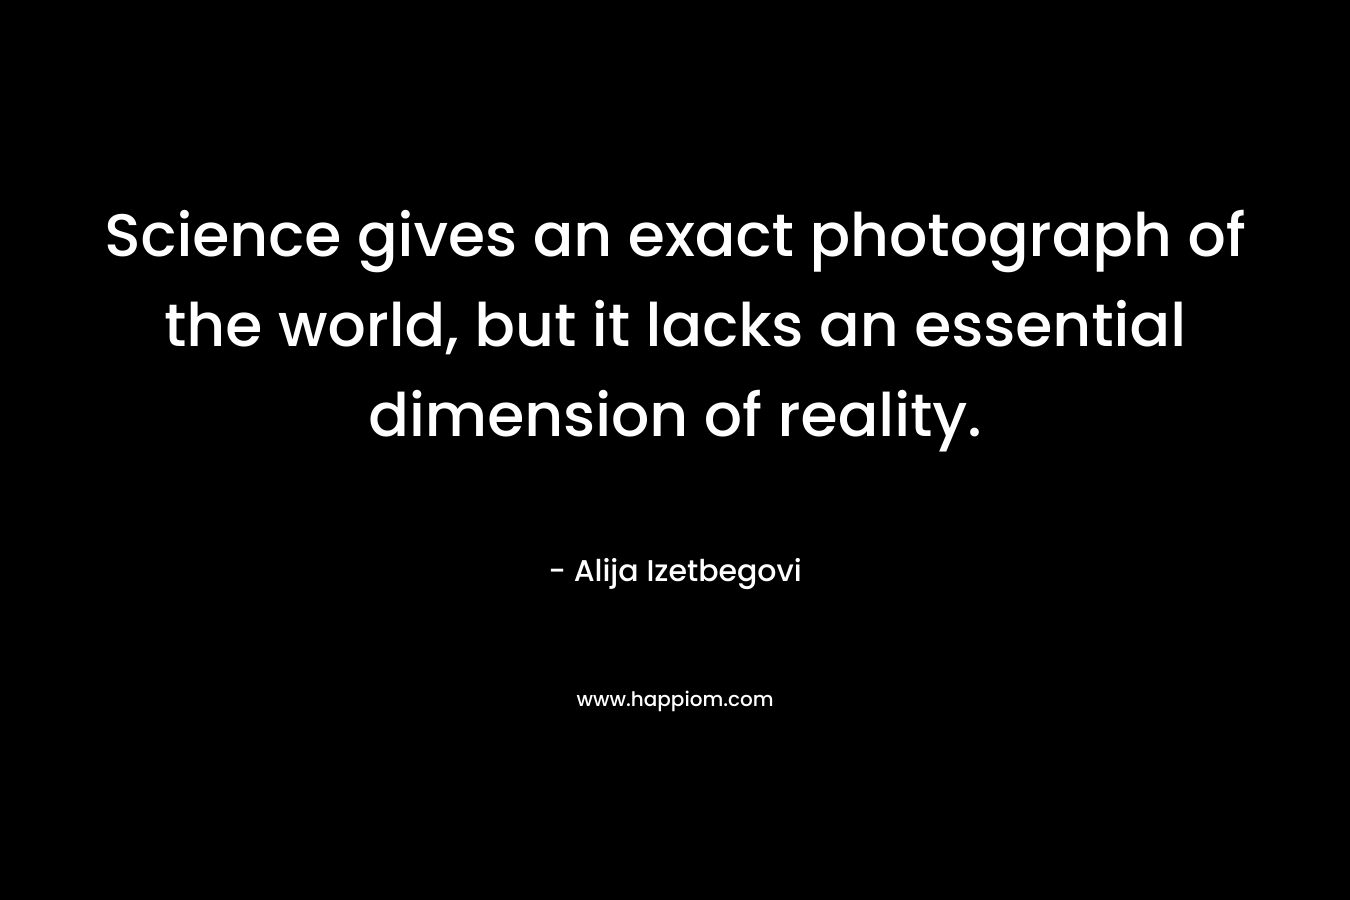 Science gives an exact photograph of the world, but it lacks an essential dimension of reality.